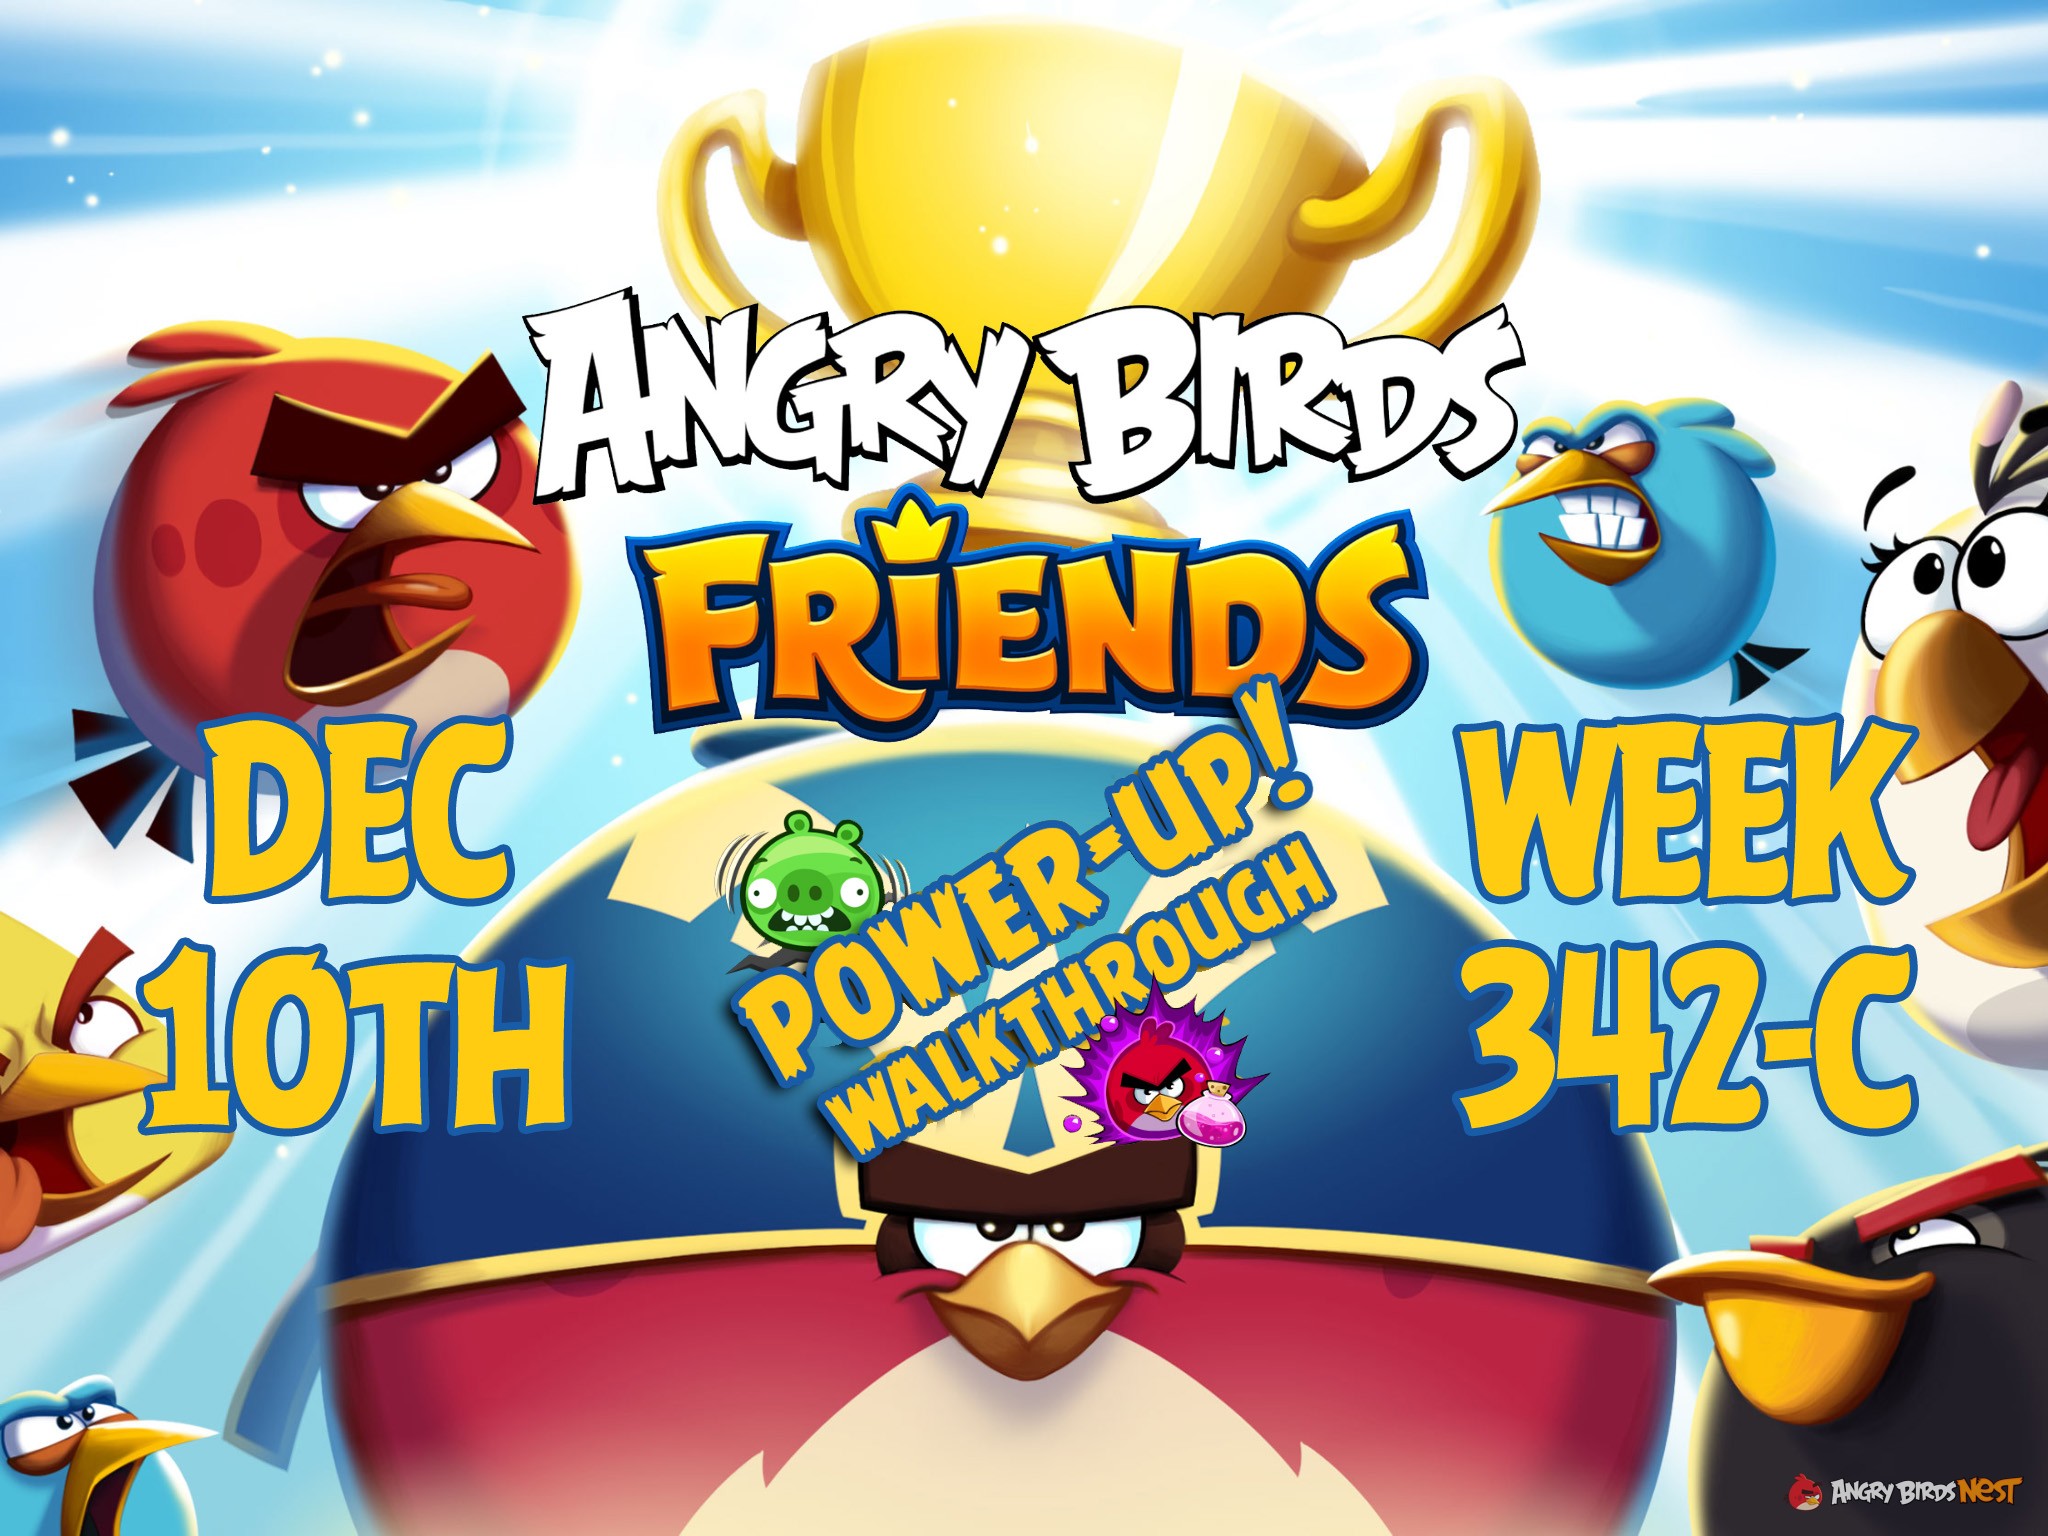 Angry-Birds-Friends-Tournament-Week-342-C-Feature-Image-PU